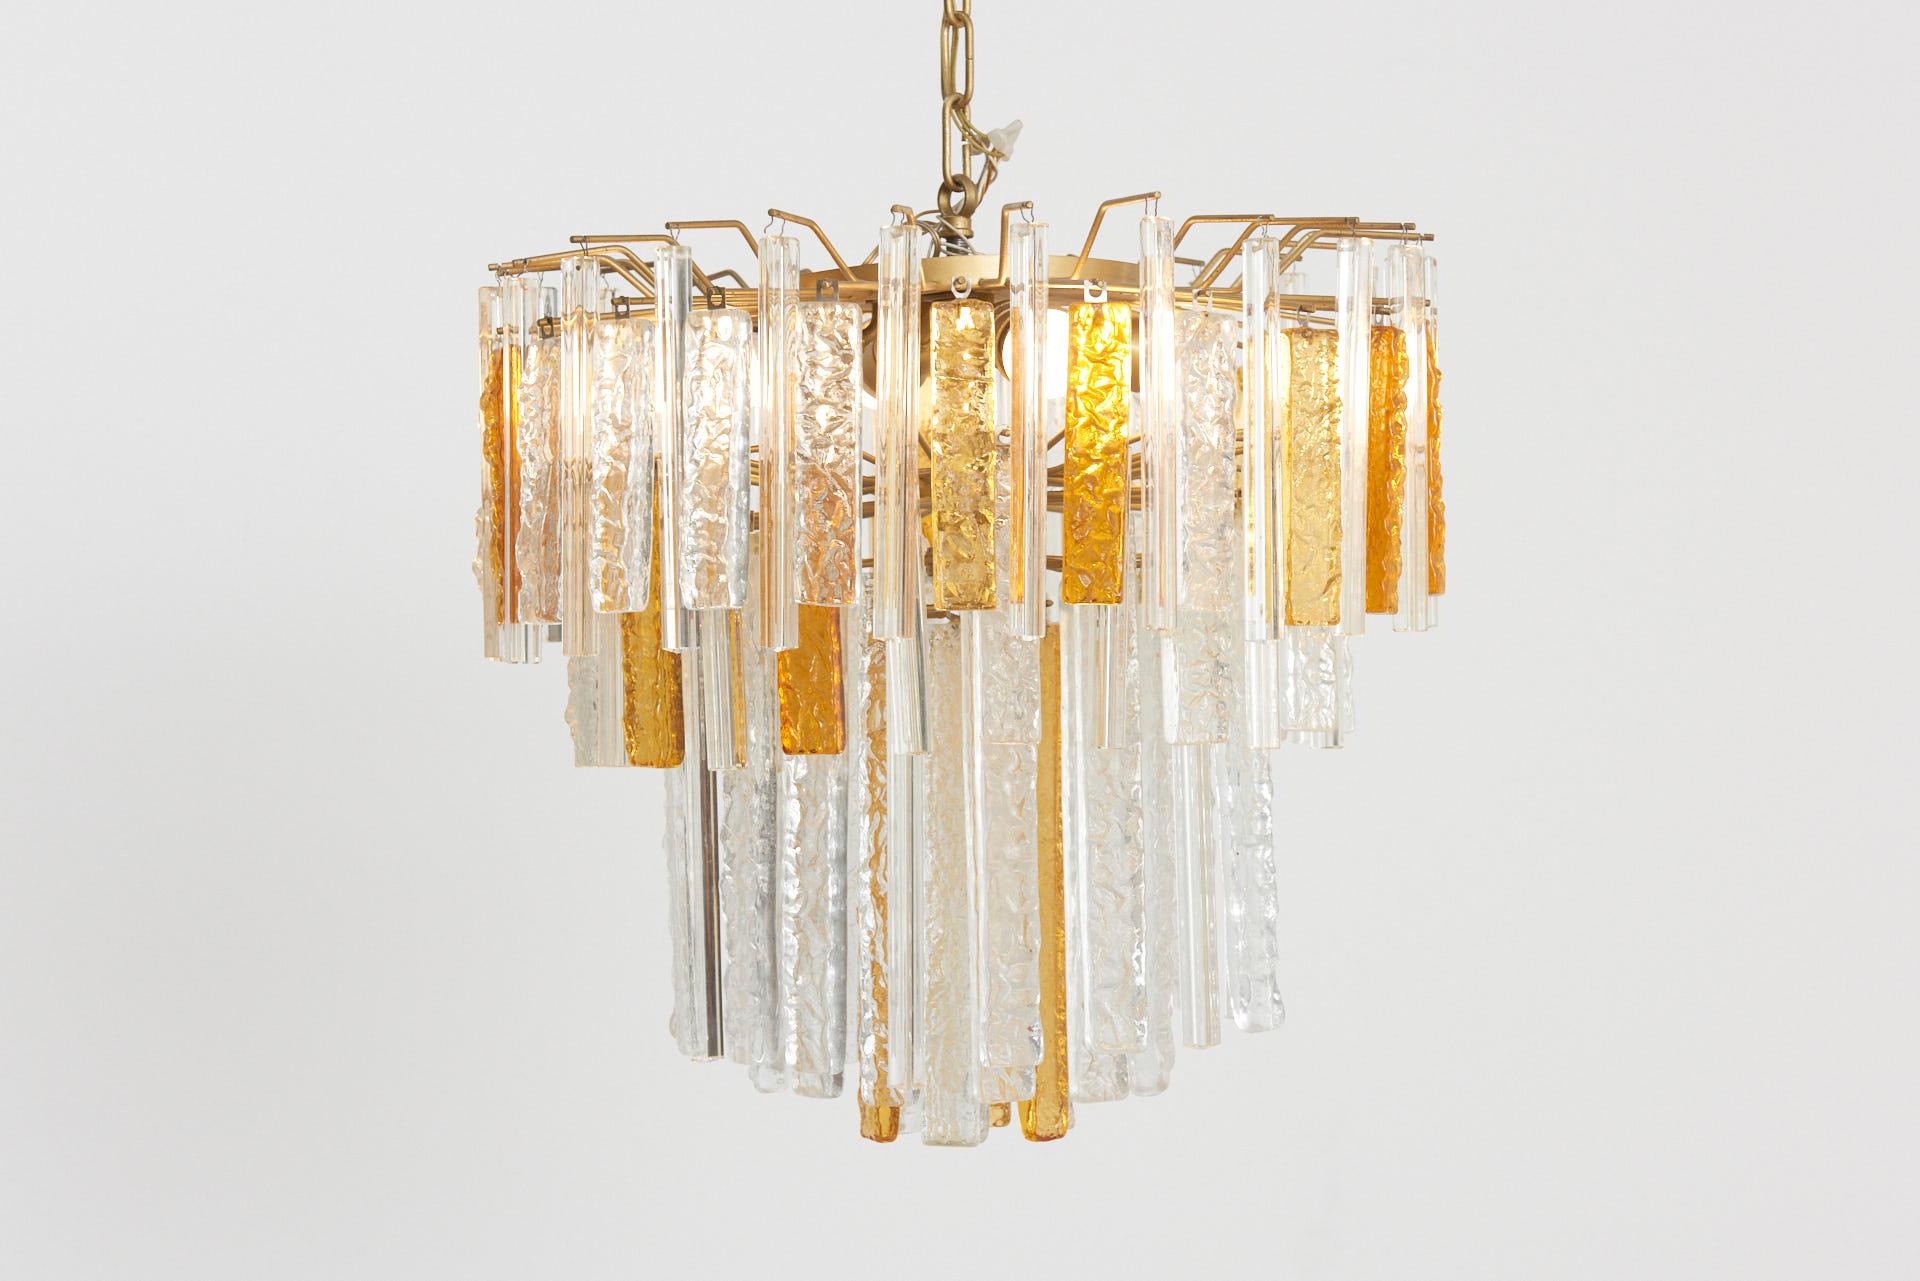 Italian chandelier from the 1960s, designed by Toni Zuccheri and made by Venini. Handmade Murano glass pieces with different lengths, cross section, texture and color alternate one another. The brass structure with four lamps bears the glass pieces